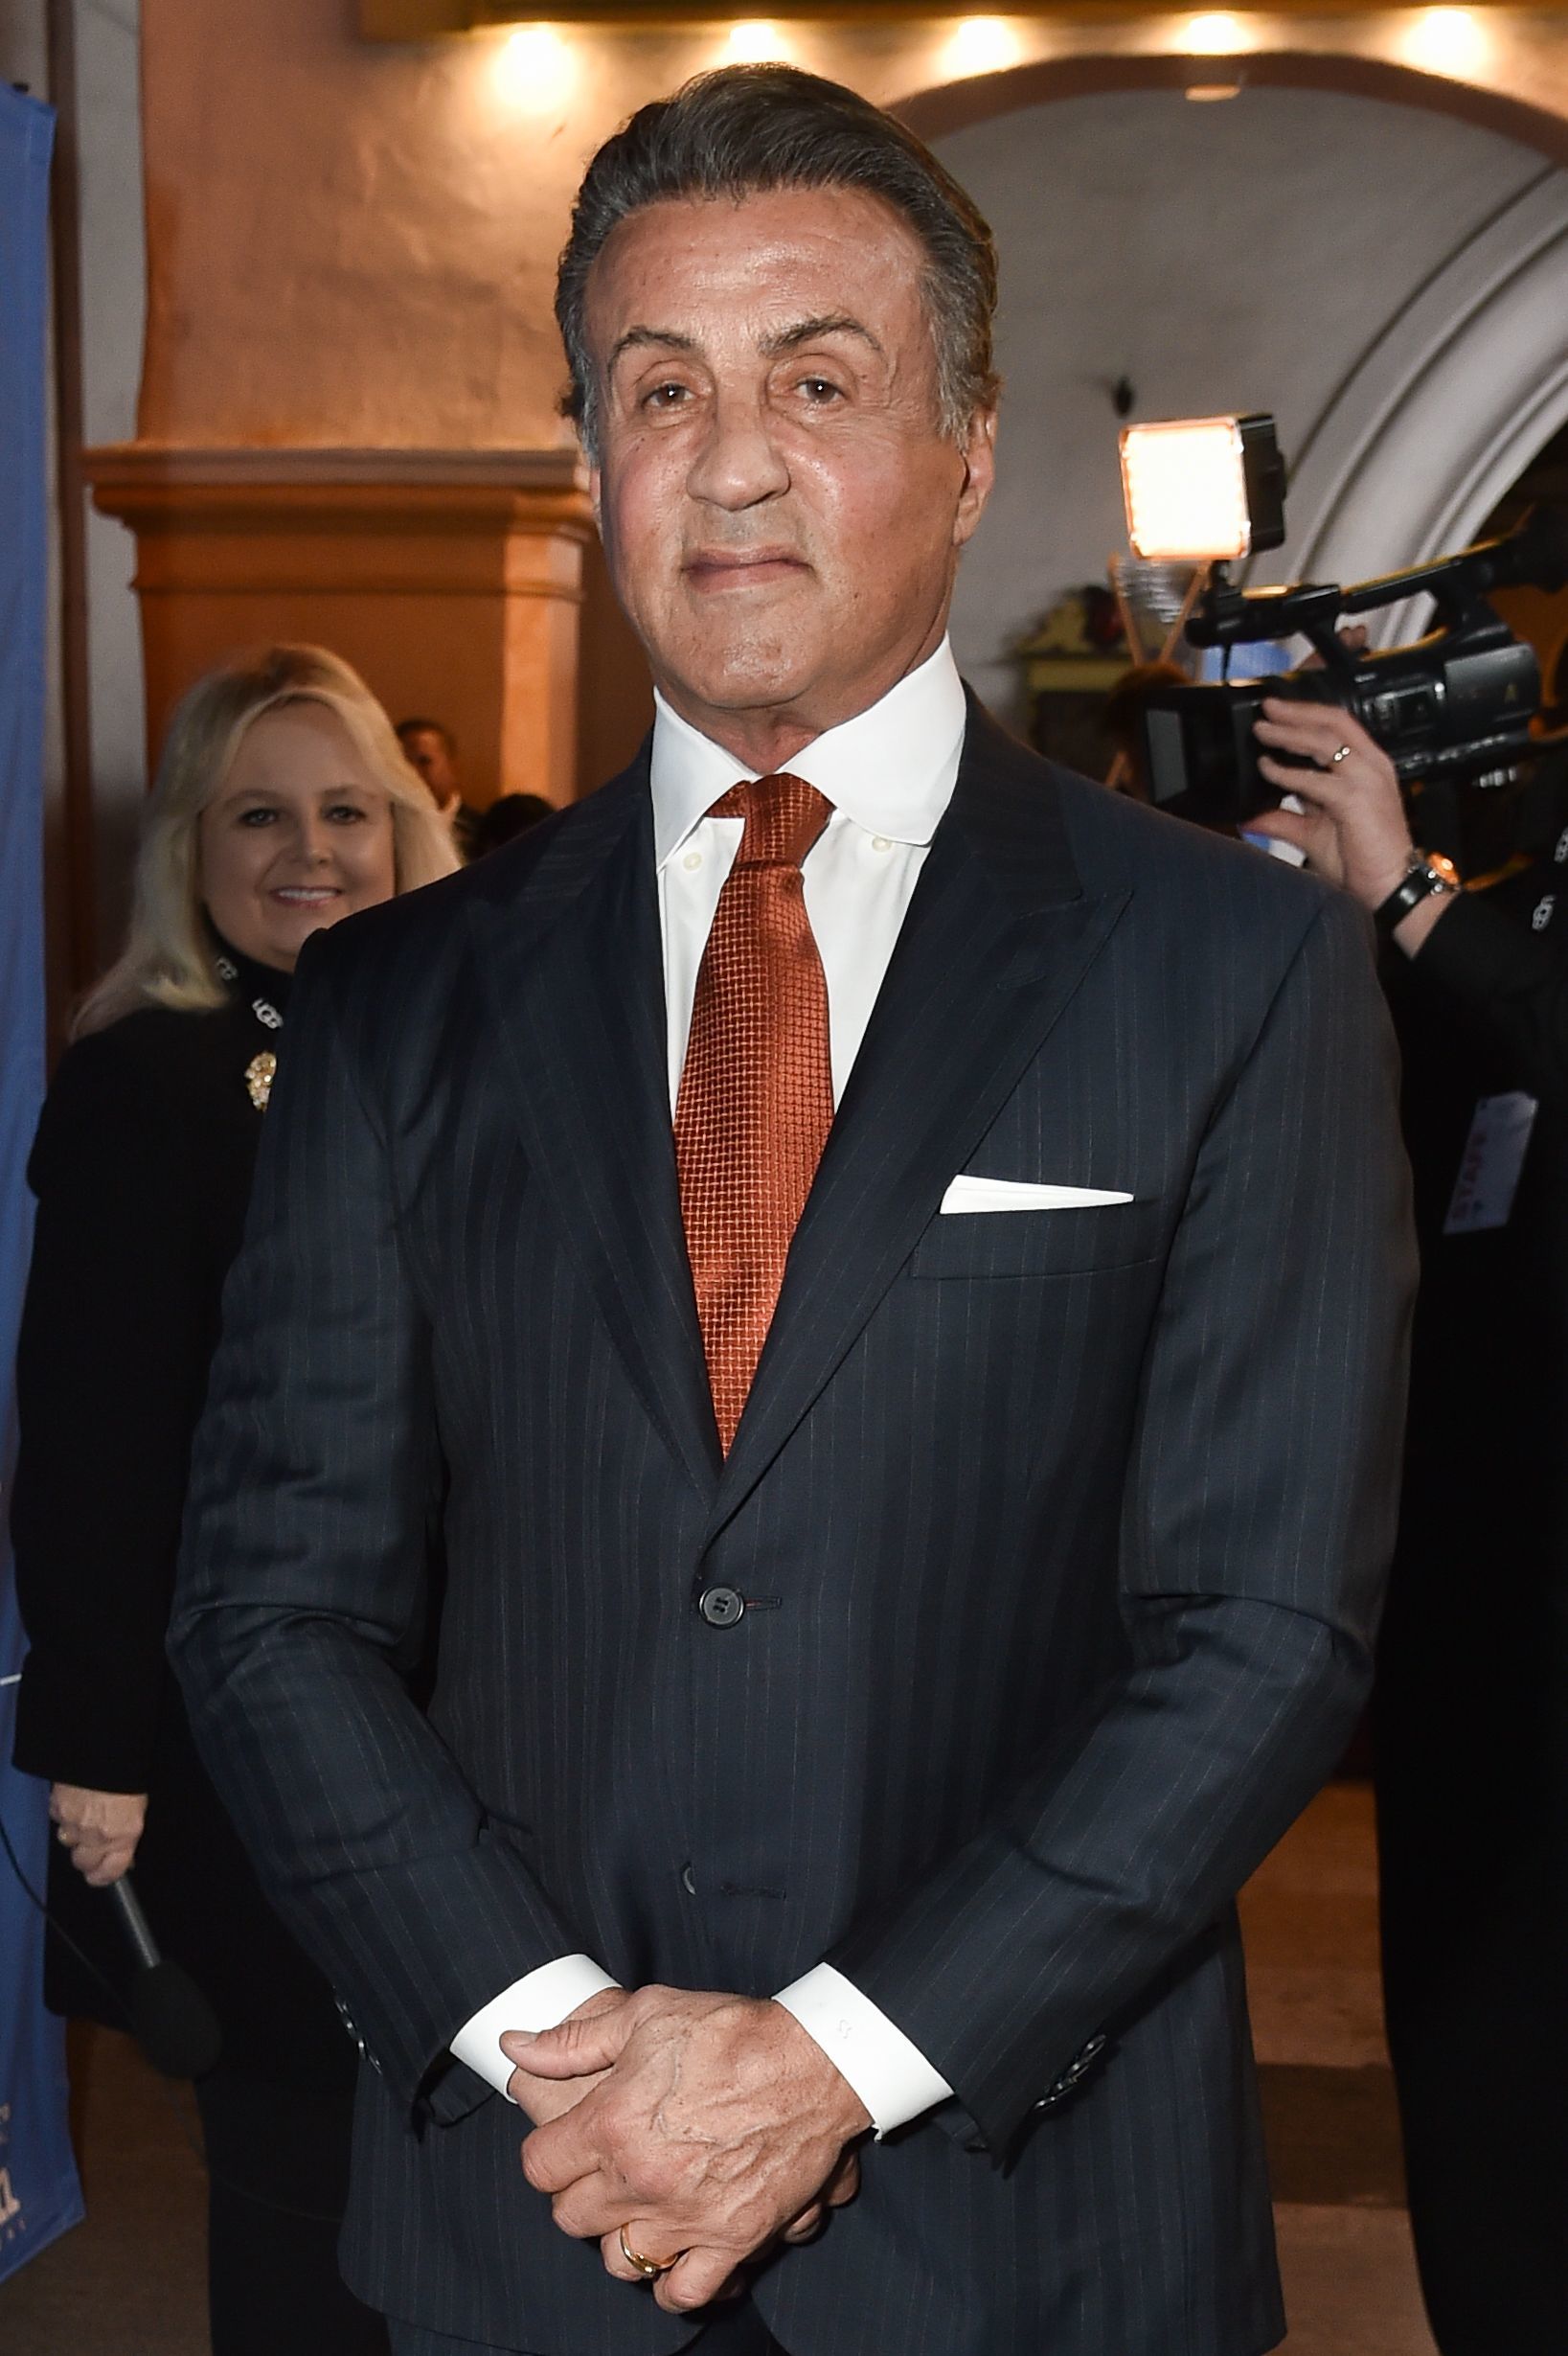 <p>We'll say this much: We assumed that Sylvester Stallone would be a "smooth" guy, but we didn't necessarily think he'd be physically smooth. Good genes, maybe? The iconic actor sported nary a wrinkle during the 31st Annual Santa Barbara International Film Festival in February 2016.</p>